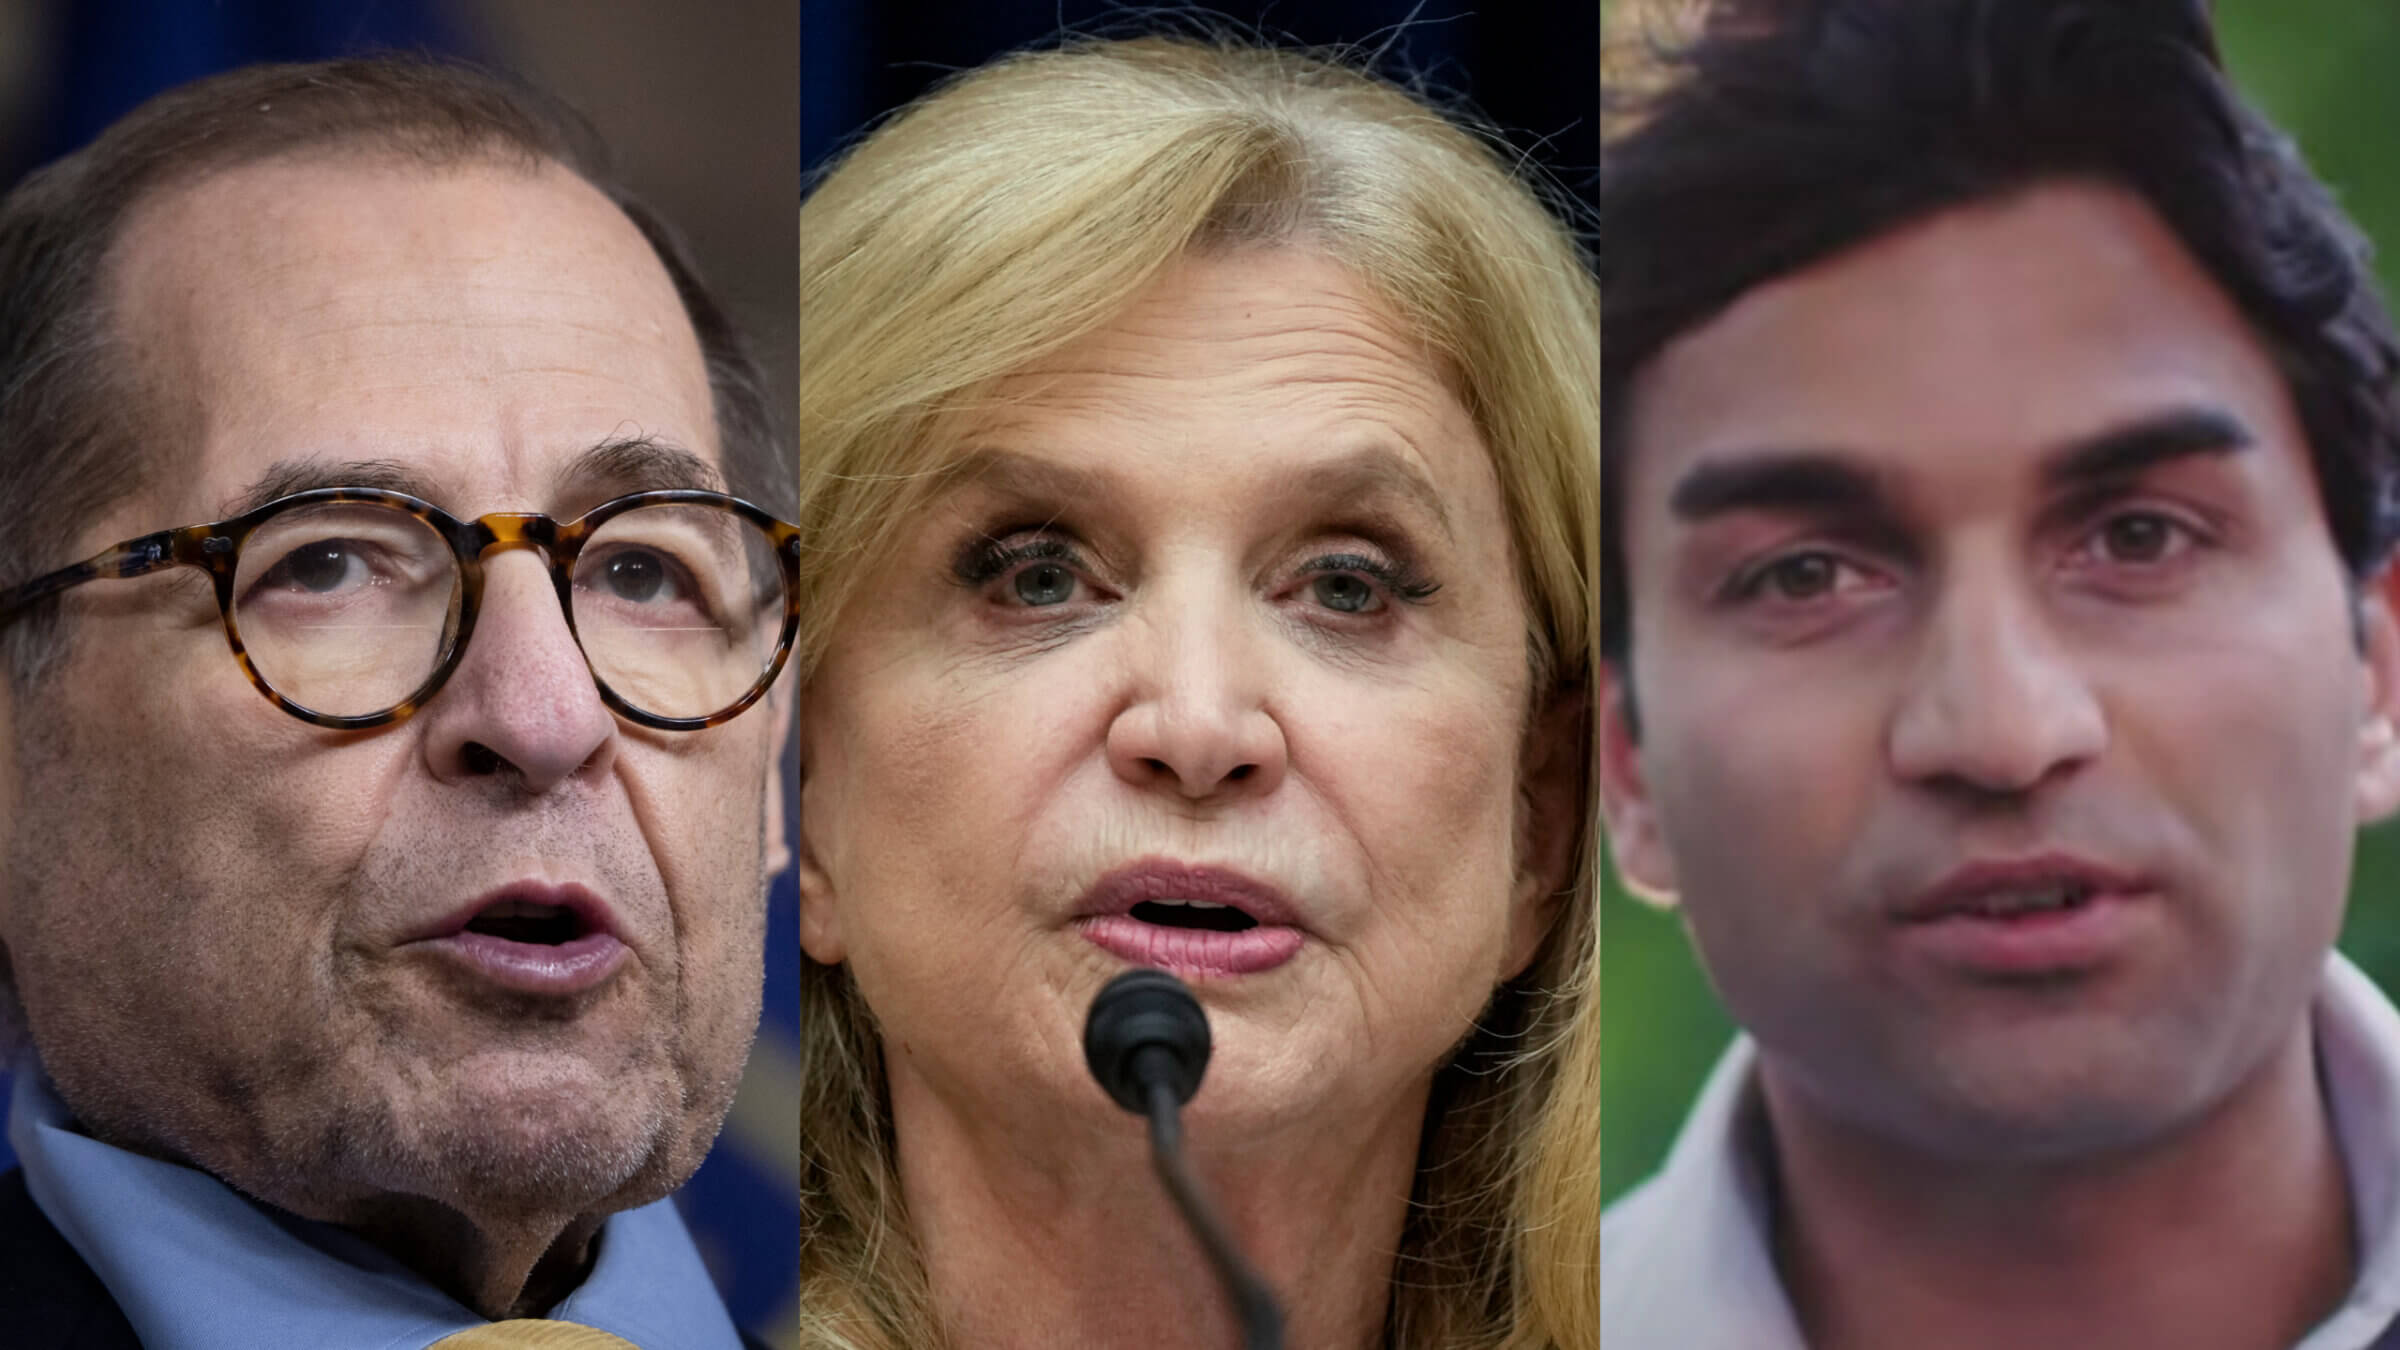 Reps. Jerry Nadler and Carolyn Maloney, and Suraj Patel are candidates in the August 23 Democratic primary for New York's 12the Congressional District. 